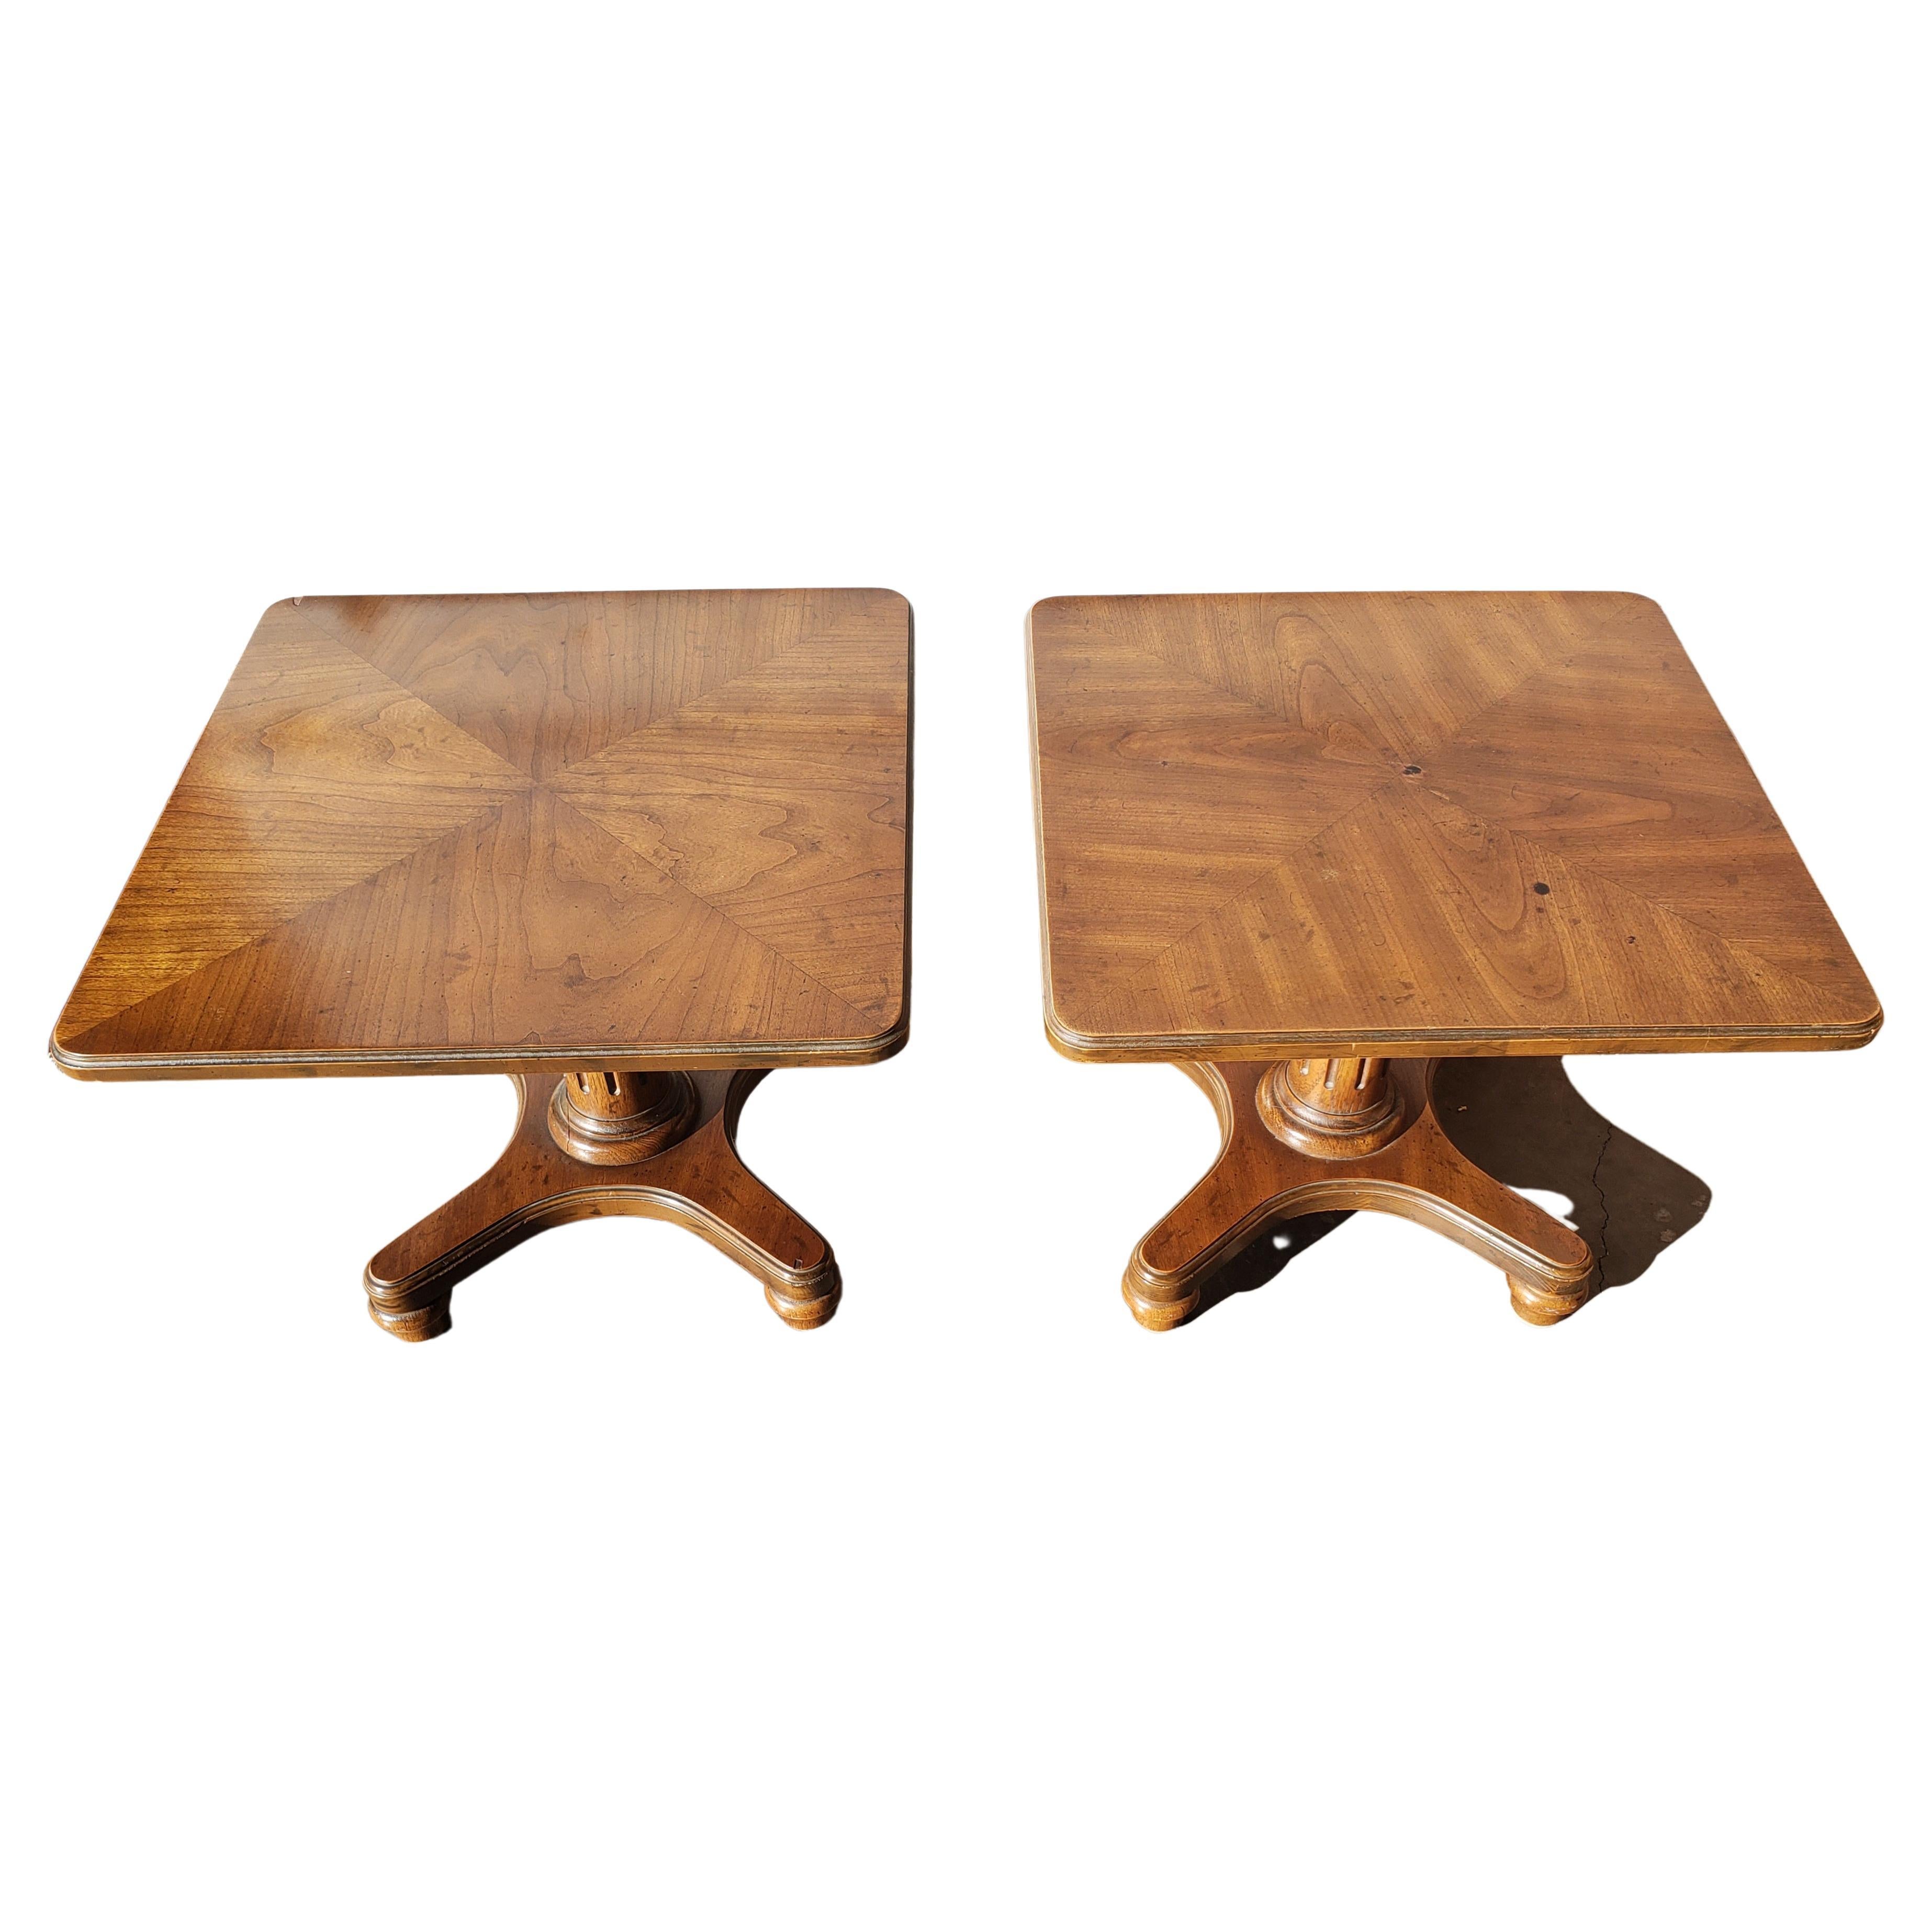 Heritage Furniture walnut book matched top pedestal side tables.
Good vintage condition with wear consistent with age and use. 
Measures: 20 inches square and stand 16.5